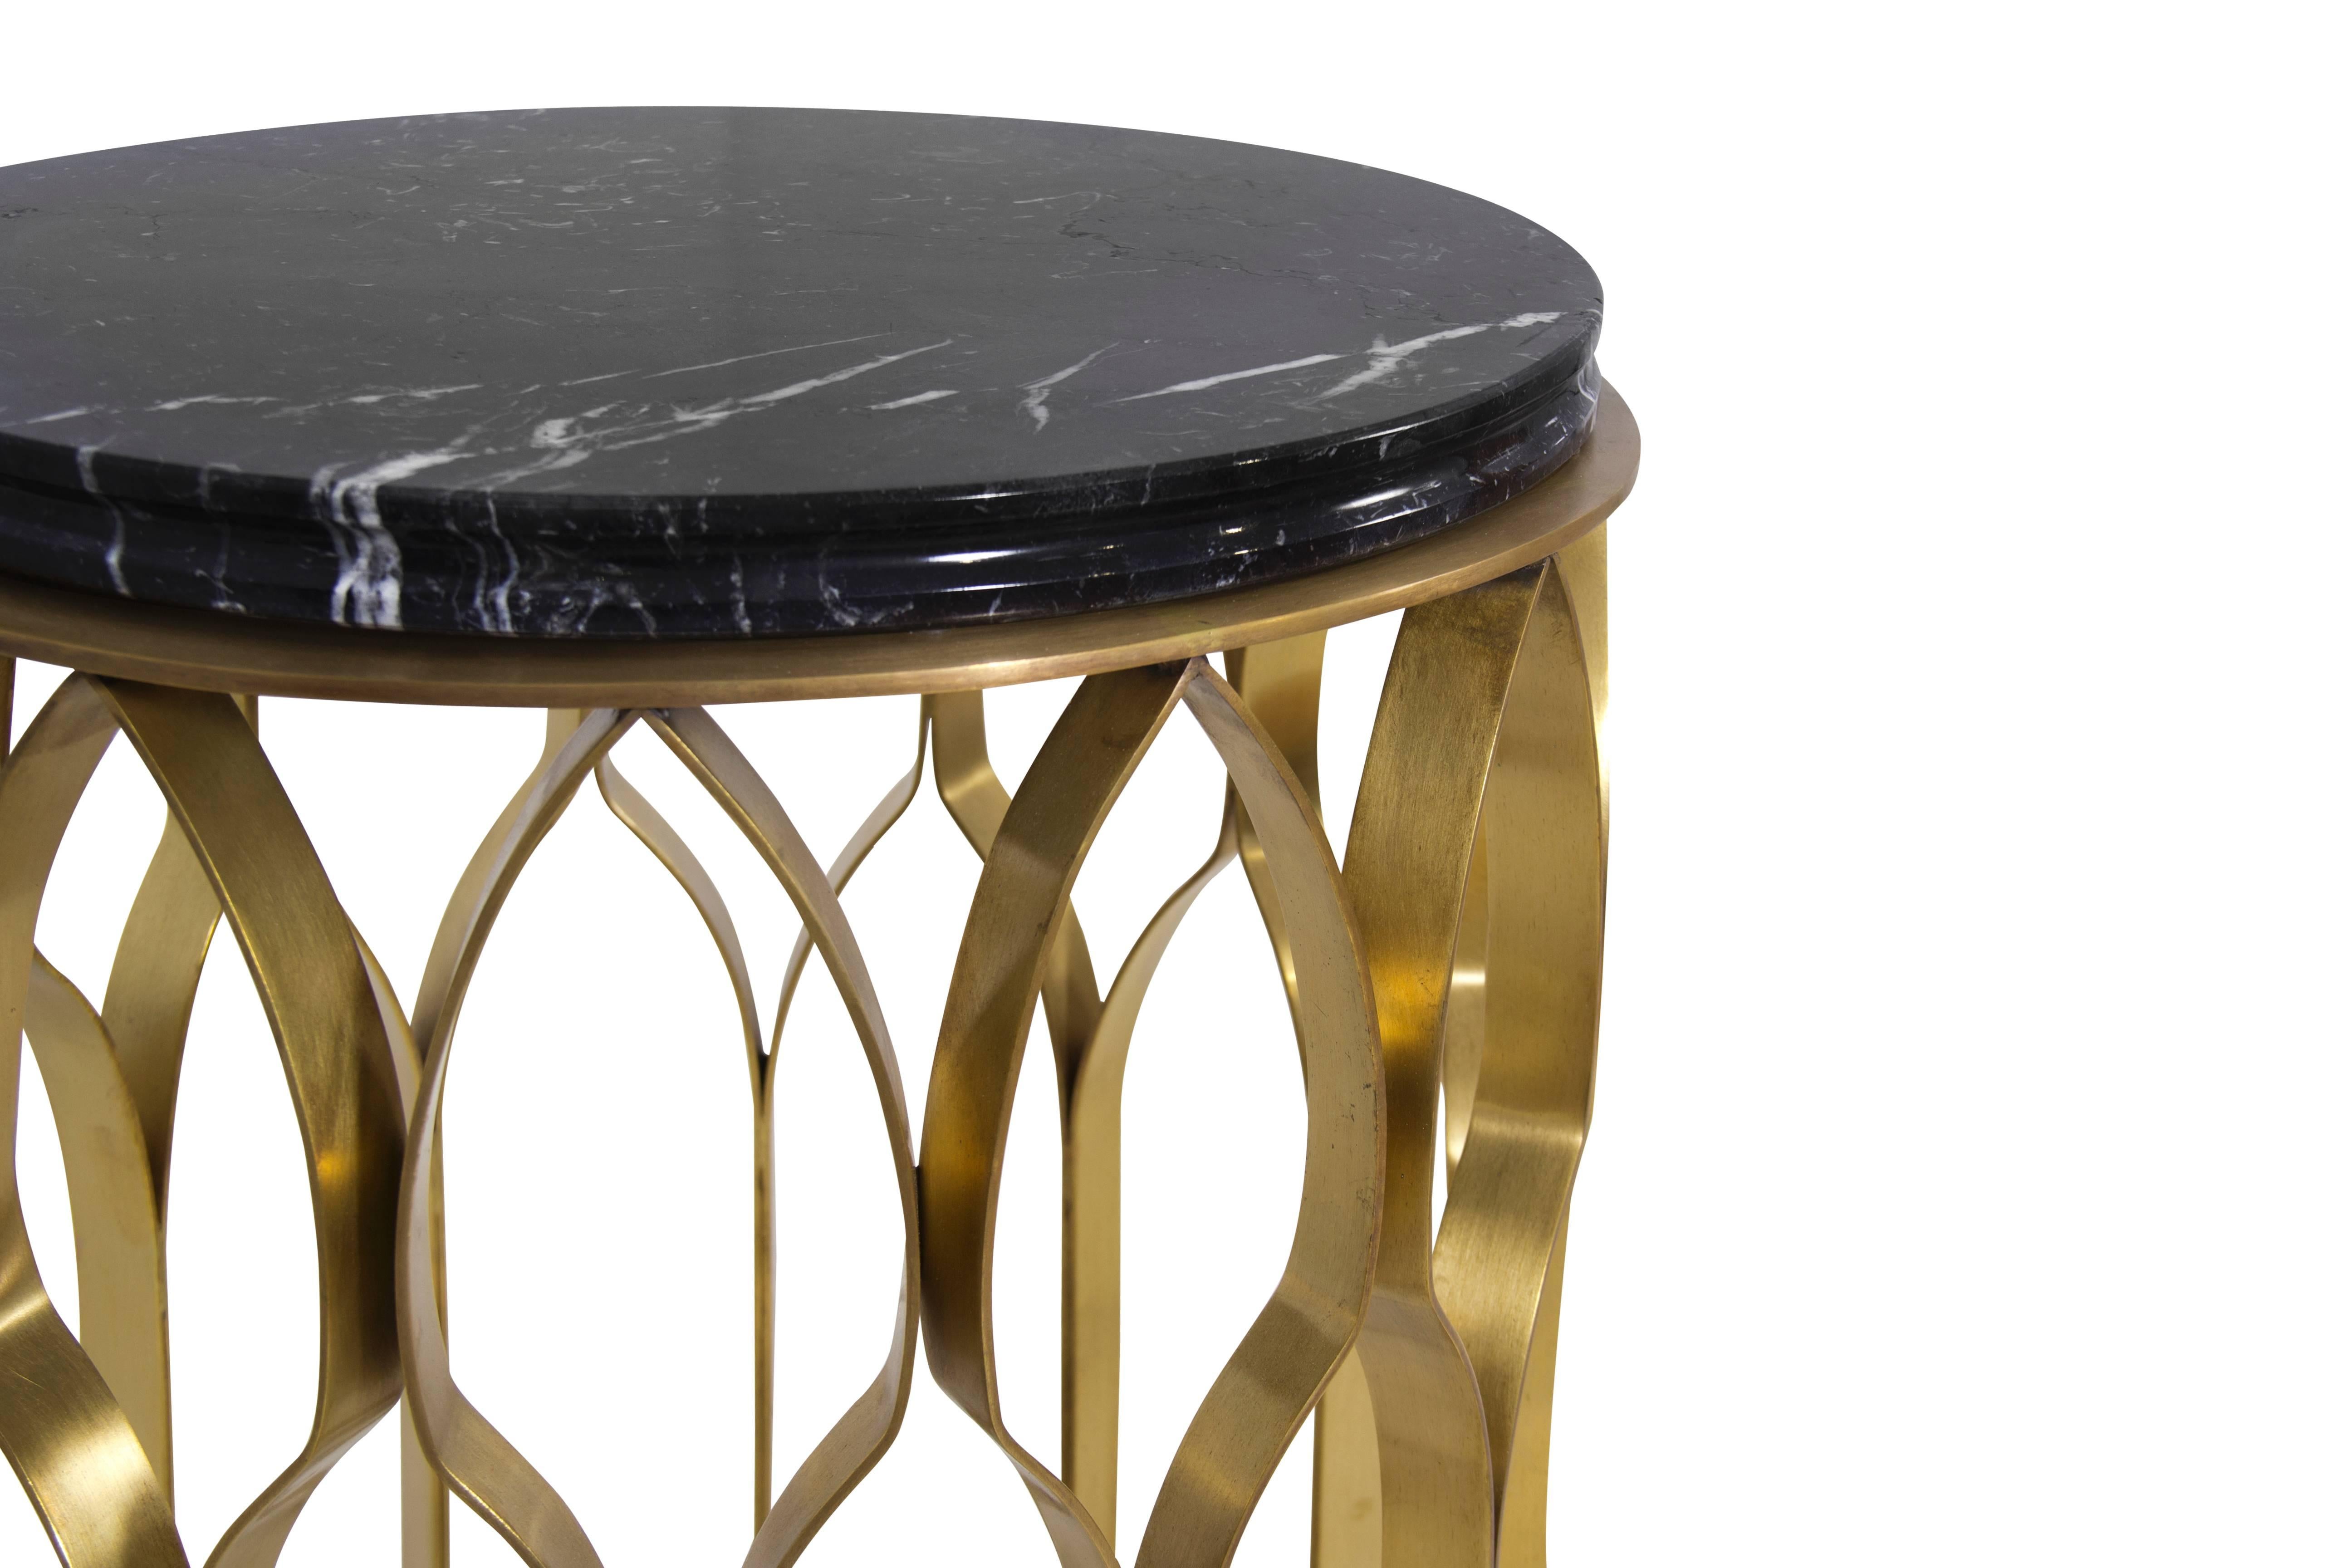 The world's finest mosques are the influences for this aptly named coffee table. The marble and brass design is the perfect hybrid of strength and delicacy, much like its inspiration. Its architectural element is most obviously depicted in its